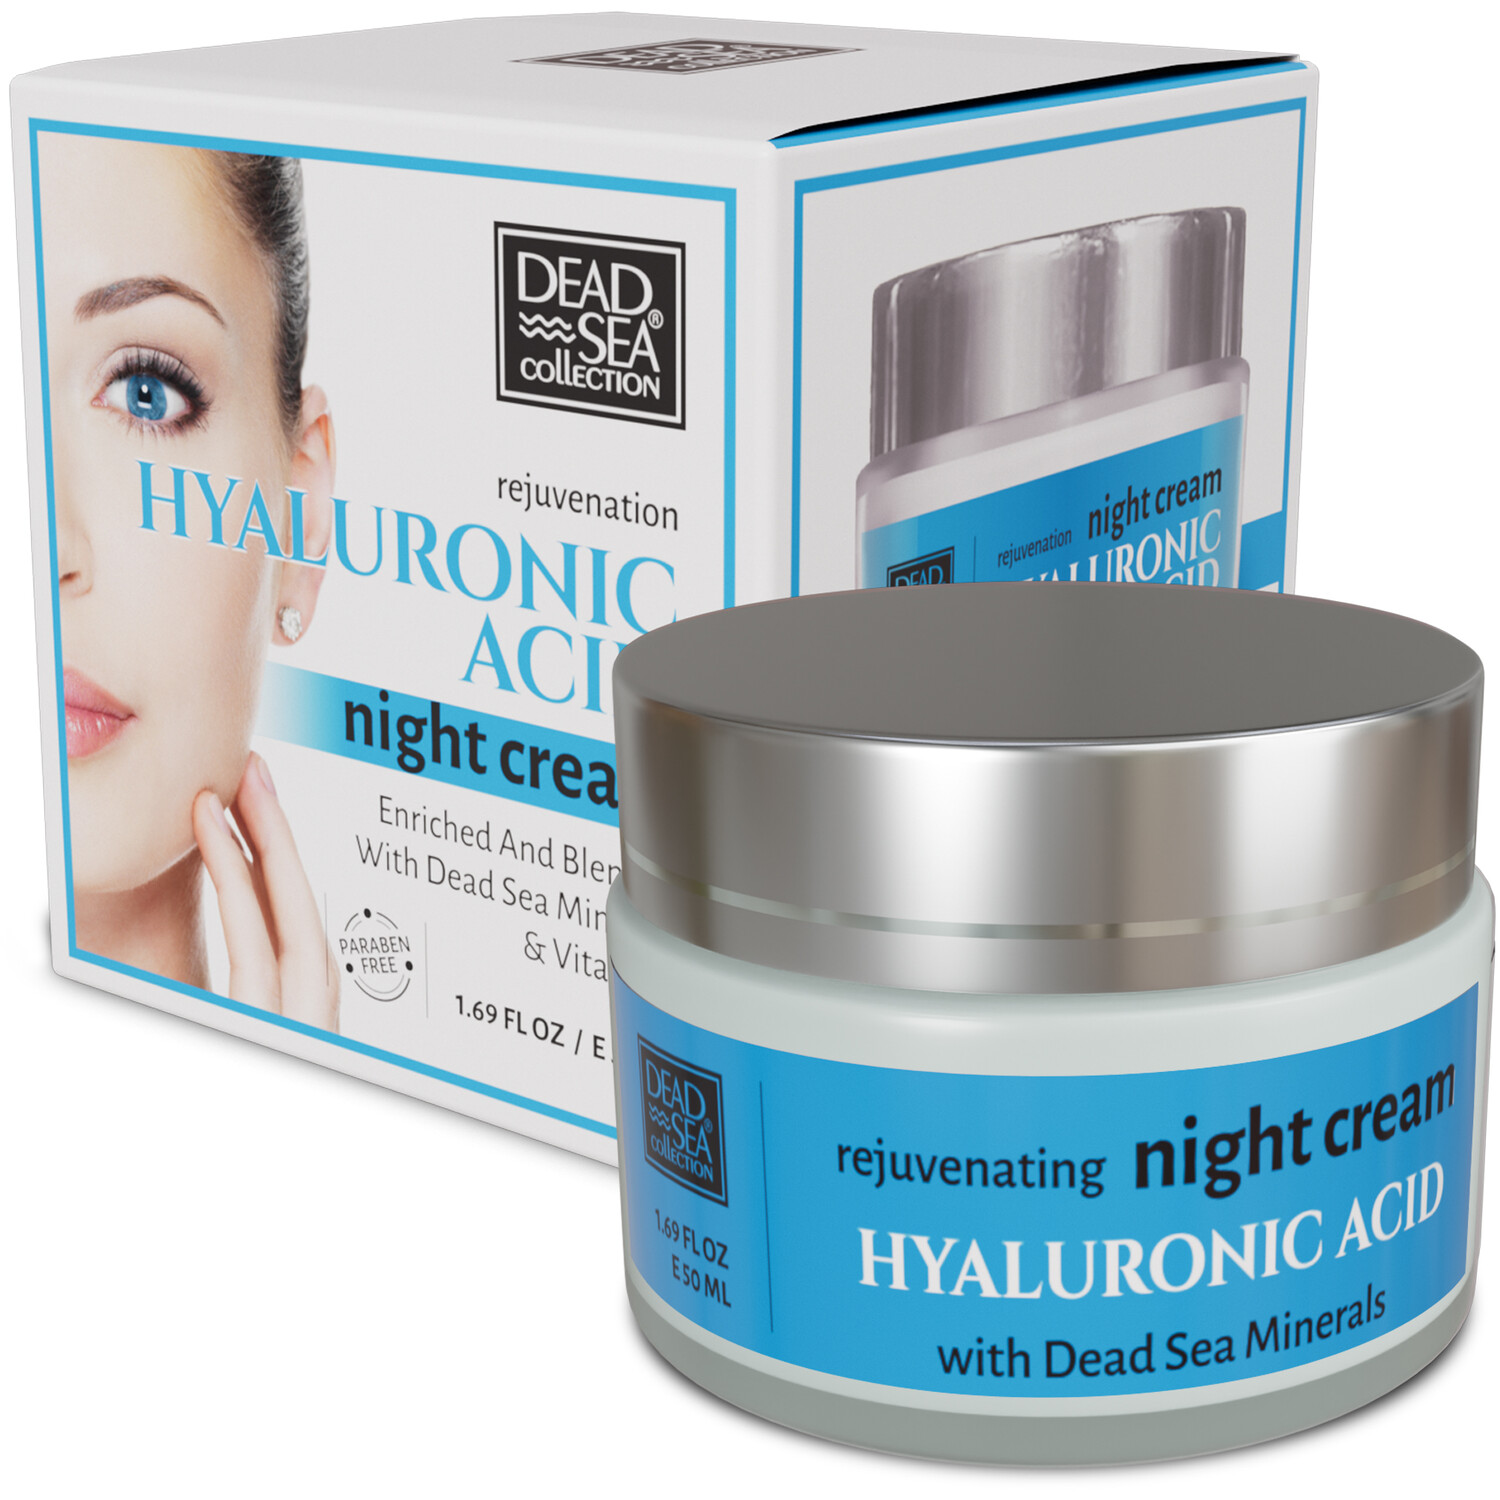 Dead Sea Collection Hyaluronic Acid Night Cream - White Image